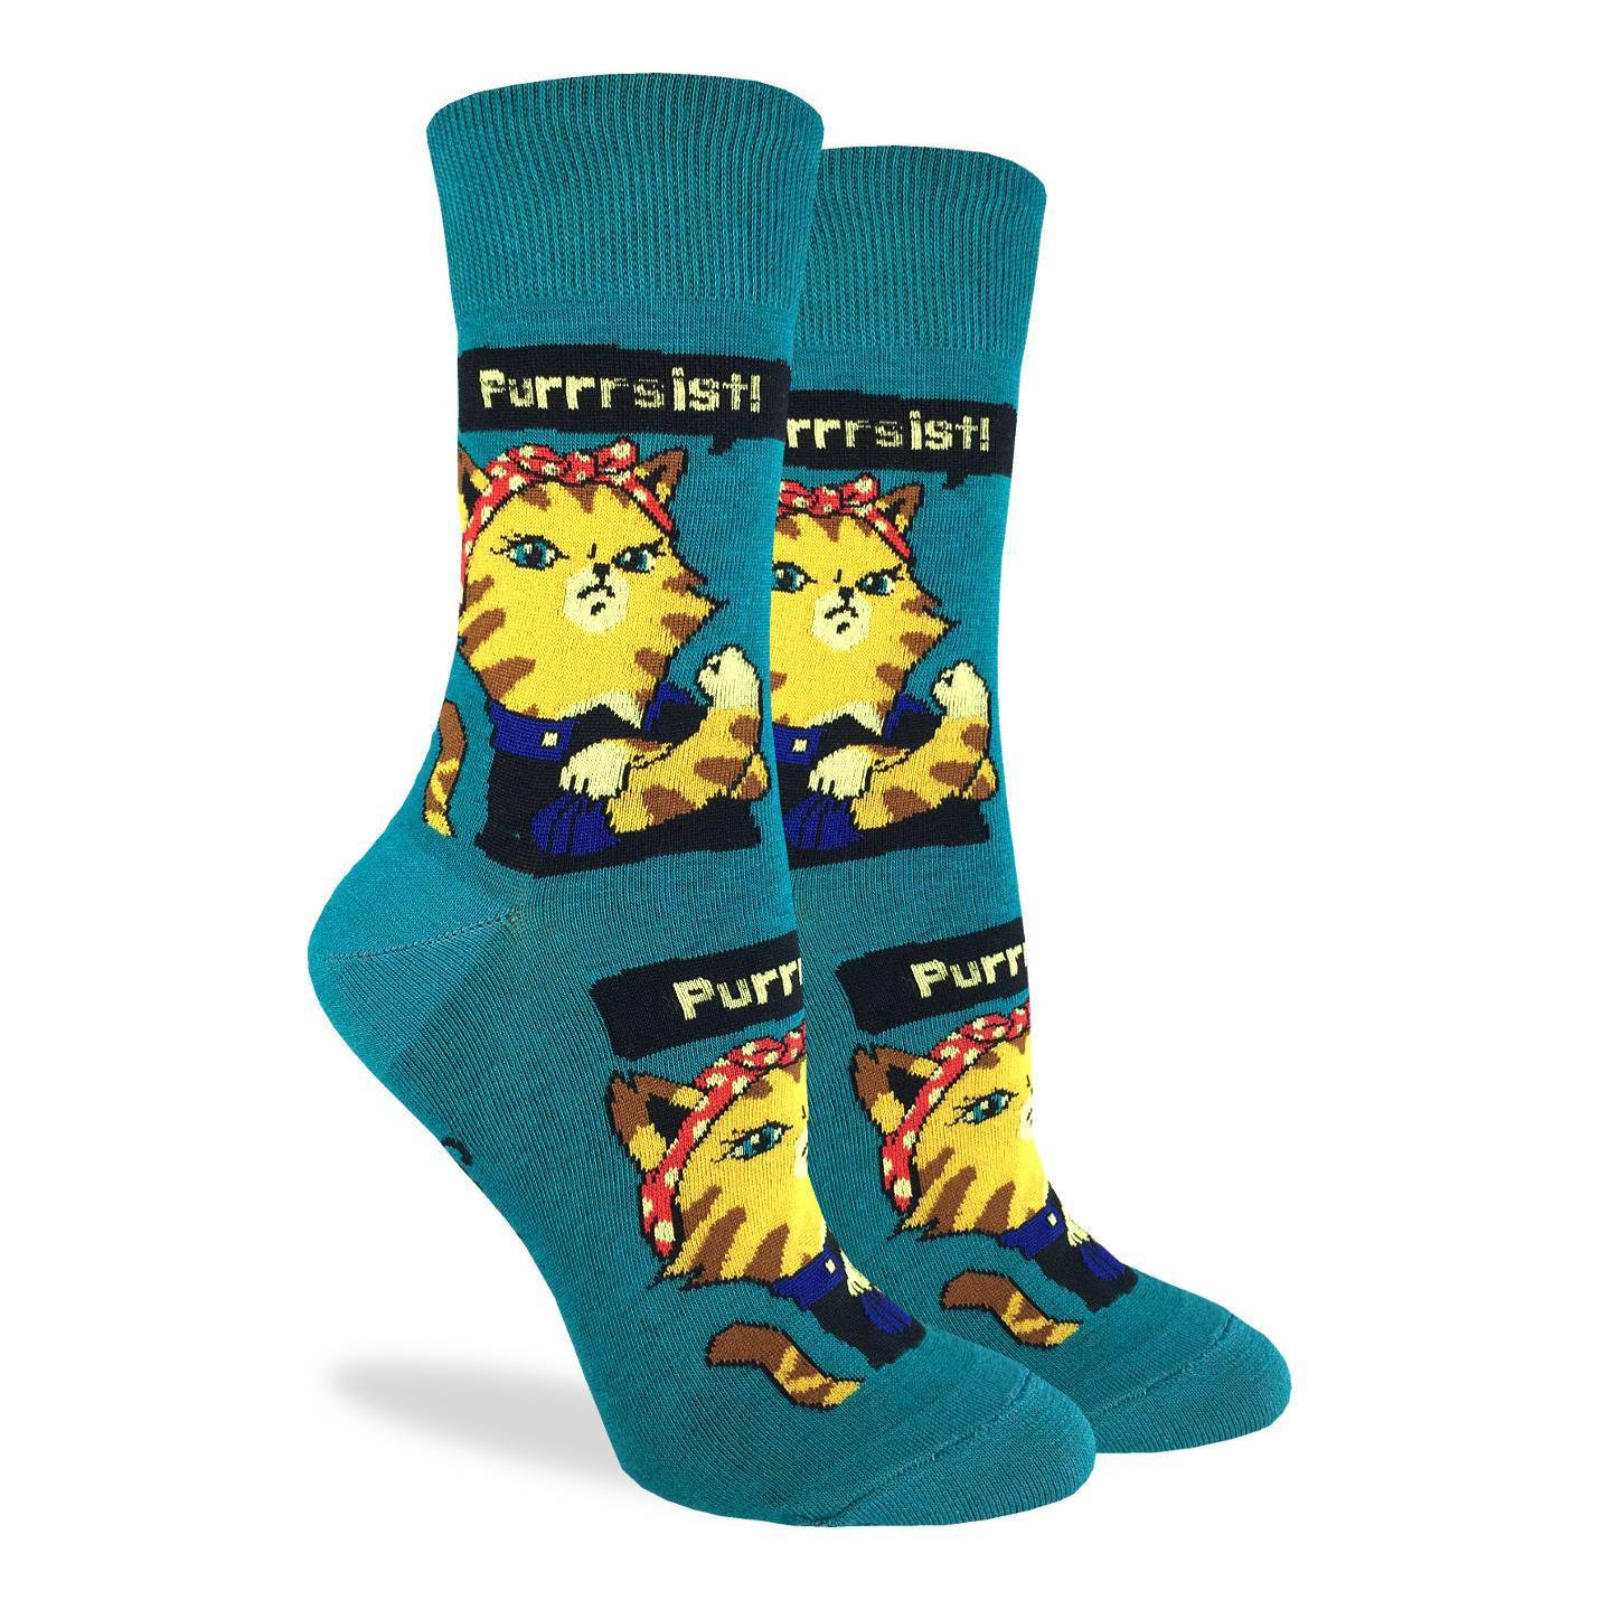 Good Luck Sock Purrsist women's teal crew sock featuring cat dressed as Rosie the Riveter saying "Purrrsist!"